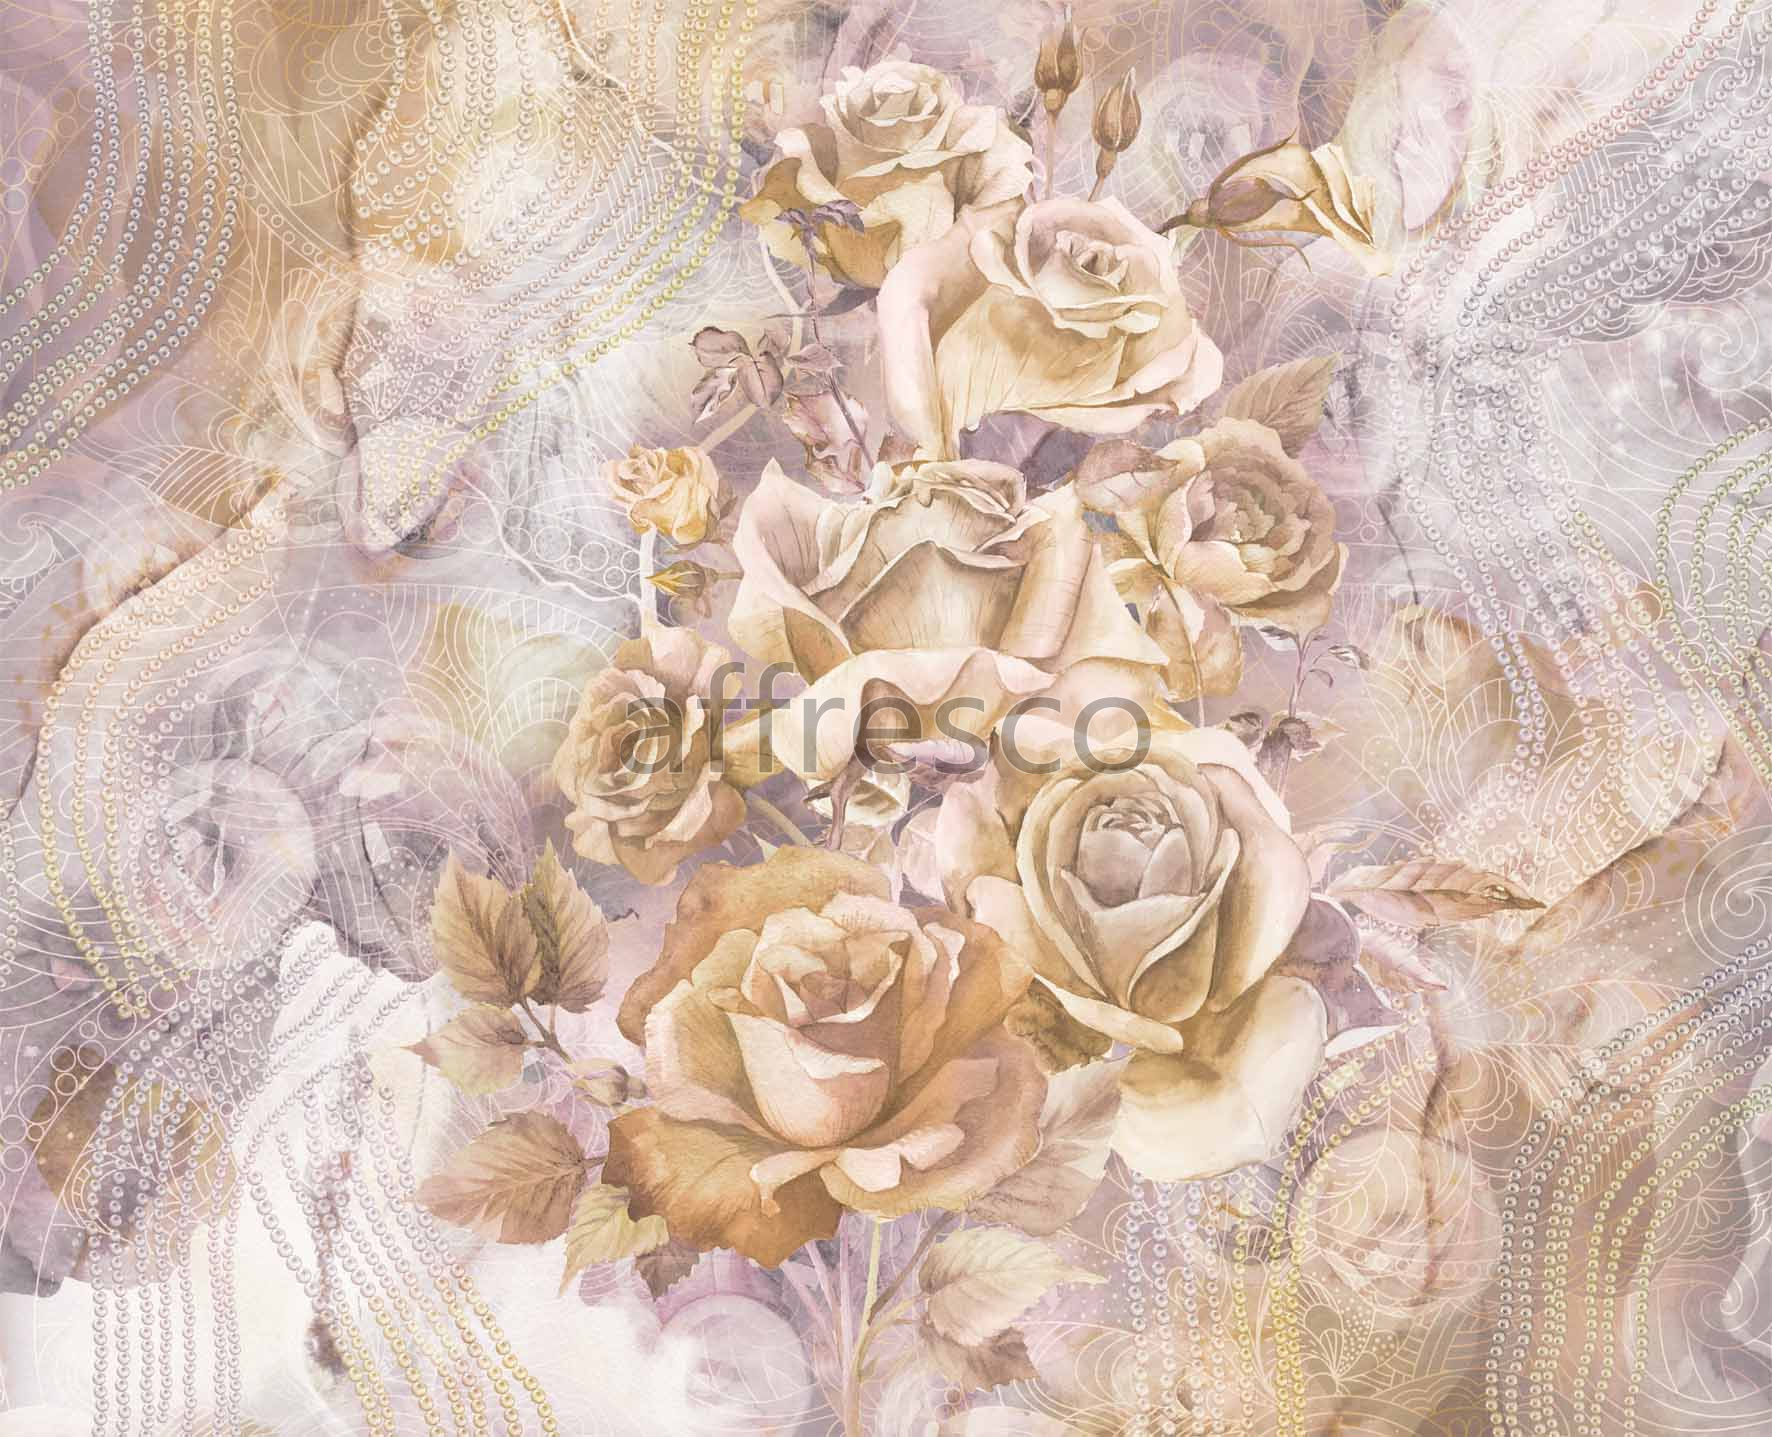 ID135915 | Flowers | Roses abstraction | Affresco Factory